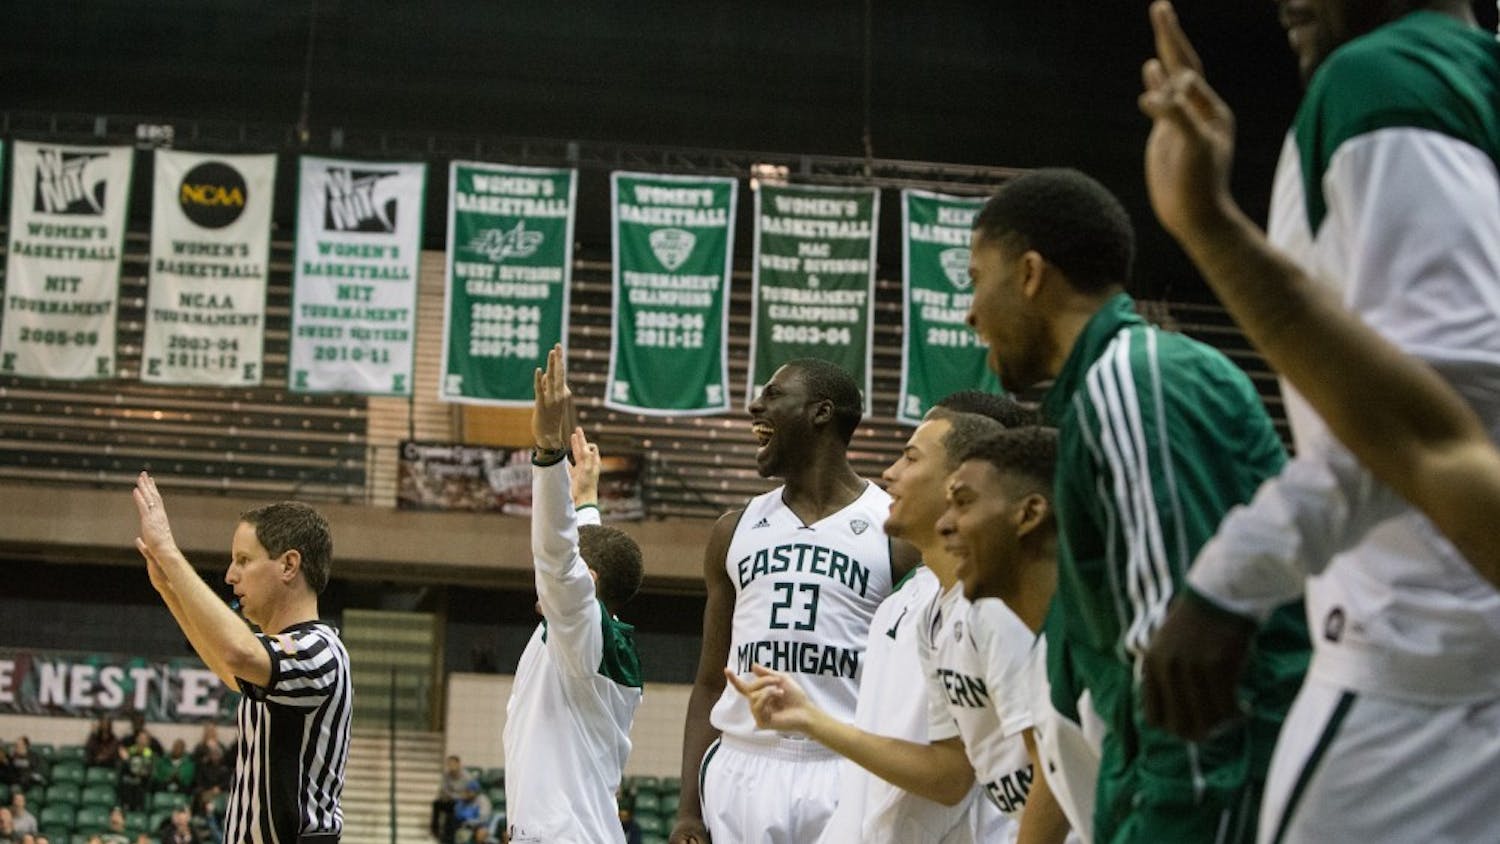 The Eastern Michigan bench reacts after Karrington Ward hits one of his six three pointers in the Eagles 72-60 win over Central Michigan University in the first round of the MAC tournament Monday night.